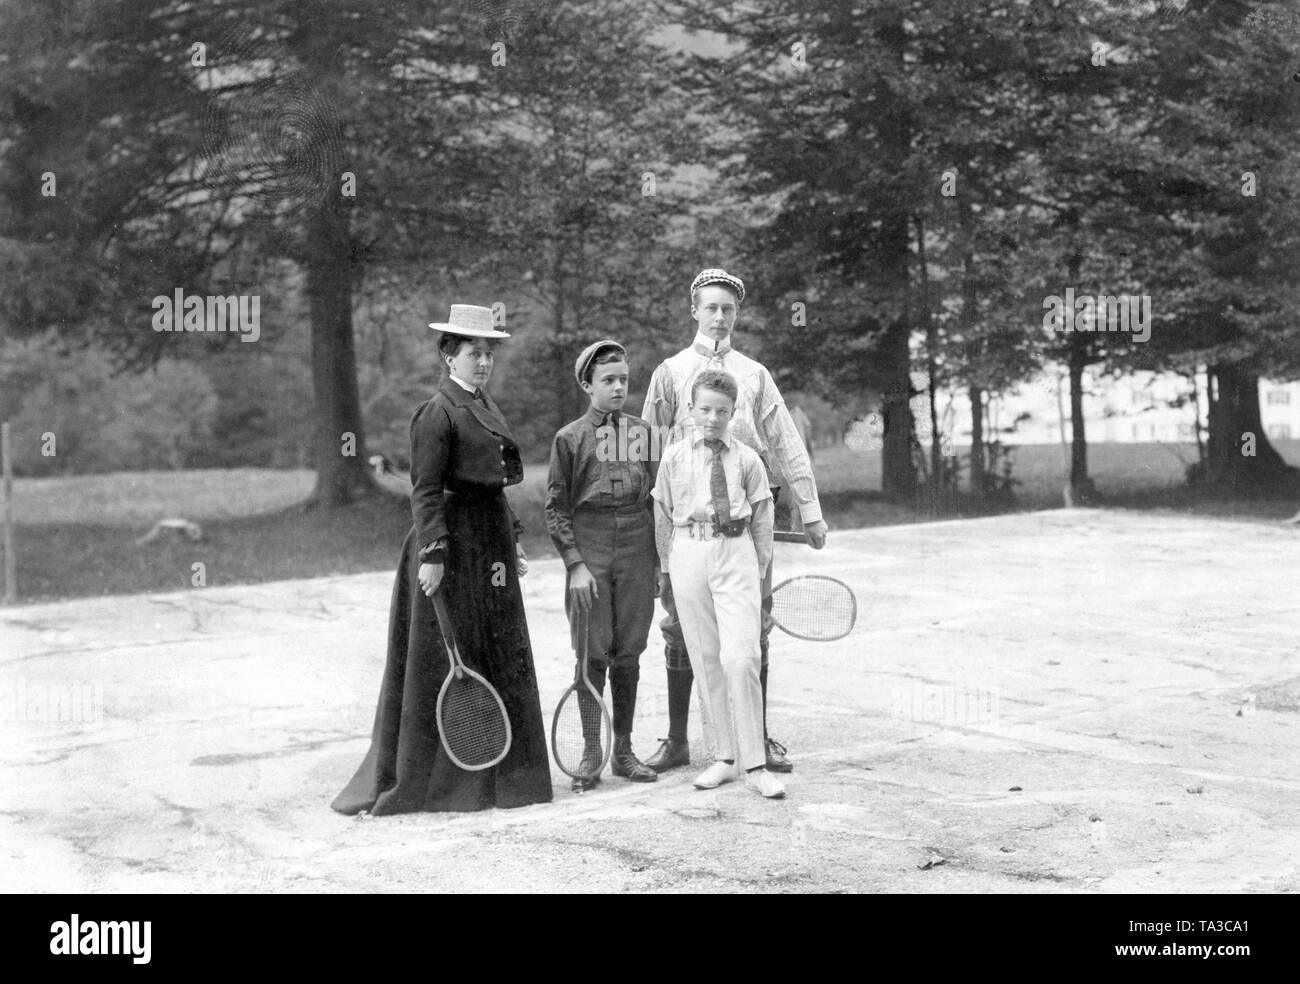 Crown Prince Wilhelm with members of the Bavarian royal family playing tennis. From left to right: Duchess Maria Jose in Bavaria (wife of Duke Karl Theodor in Bavaria, b. Princess of Portugal), her son Franz Josef in Bavaria, his cousin Luitpold in Bavaria and Crown Prince Wilhelm of Prussia. Stock Photo